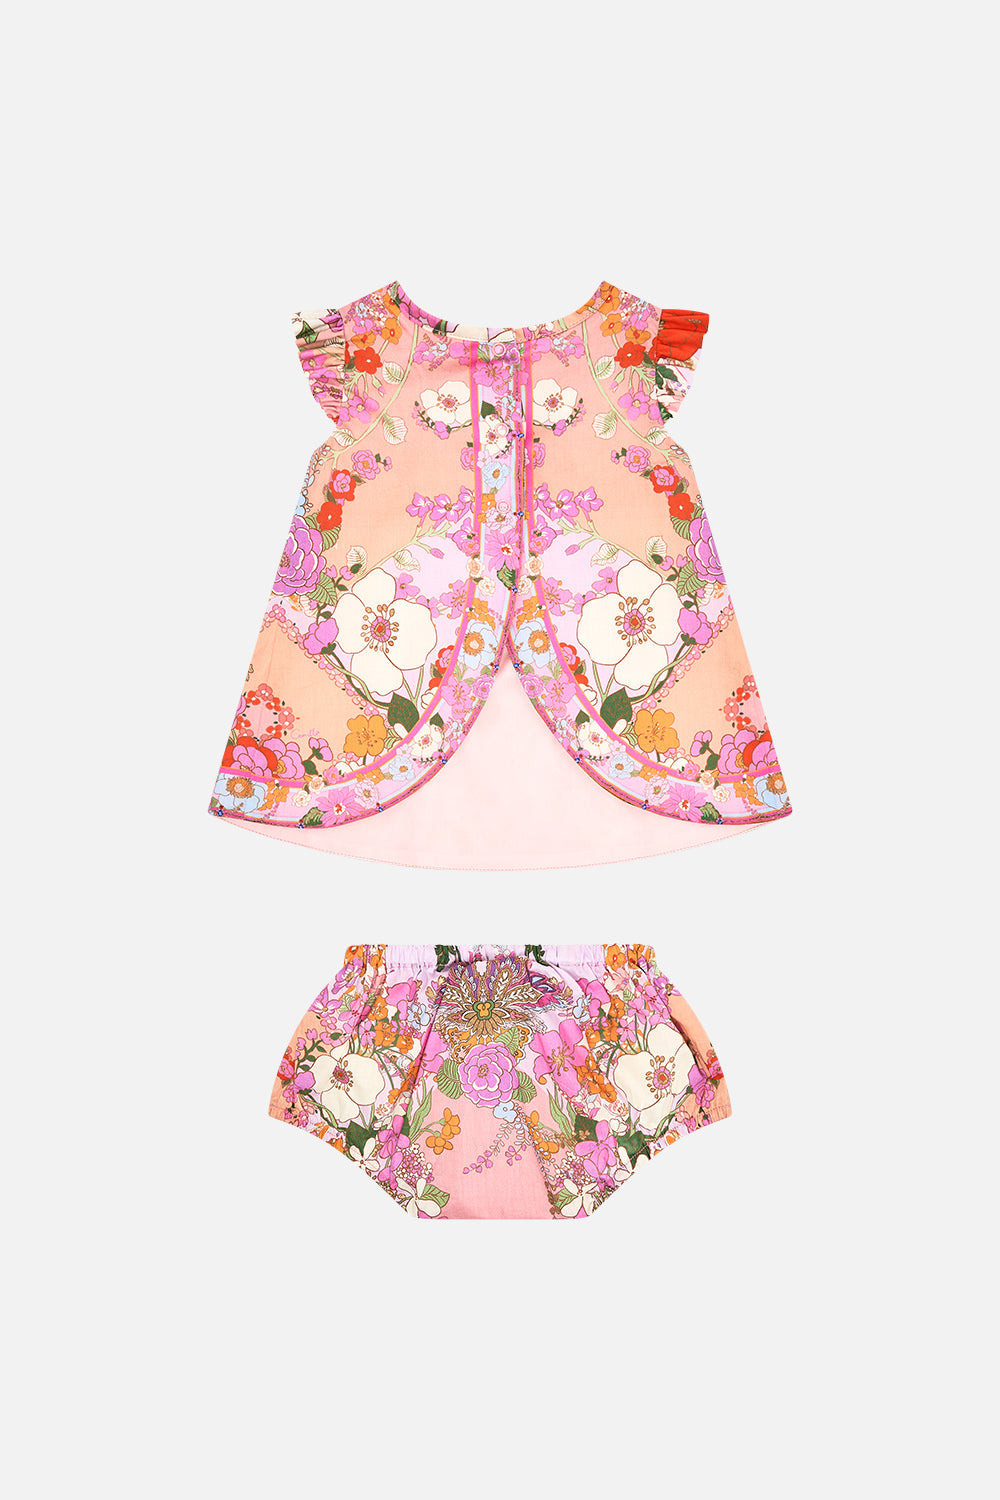 Milla by CAMILLA babies bloomer set in pink floral print Clever Clogs Print 